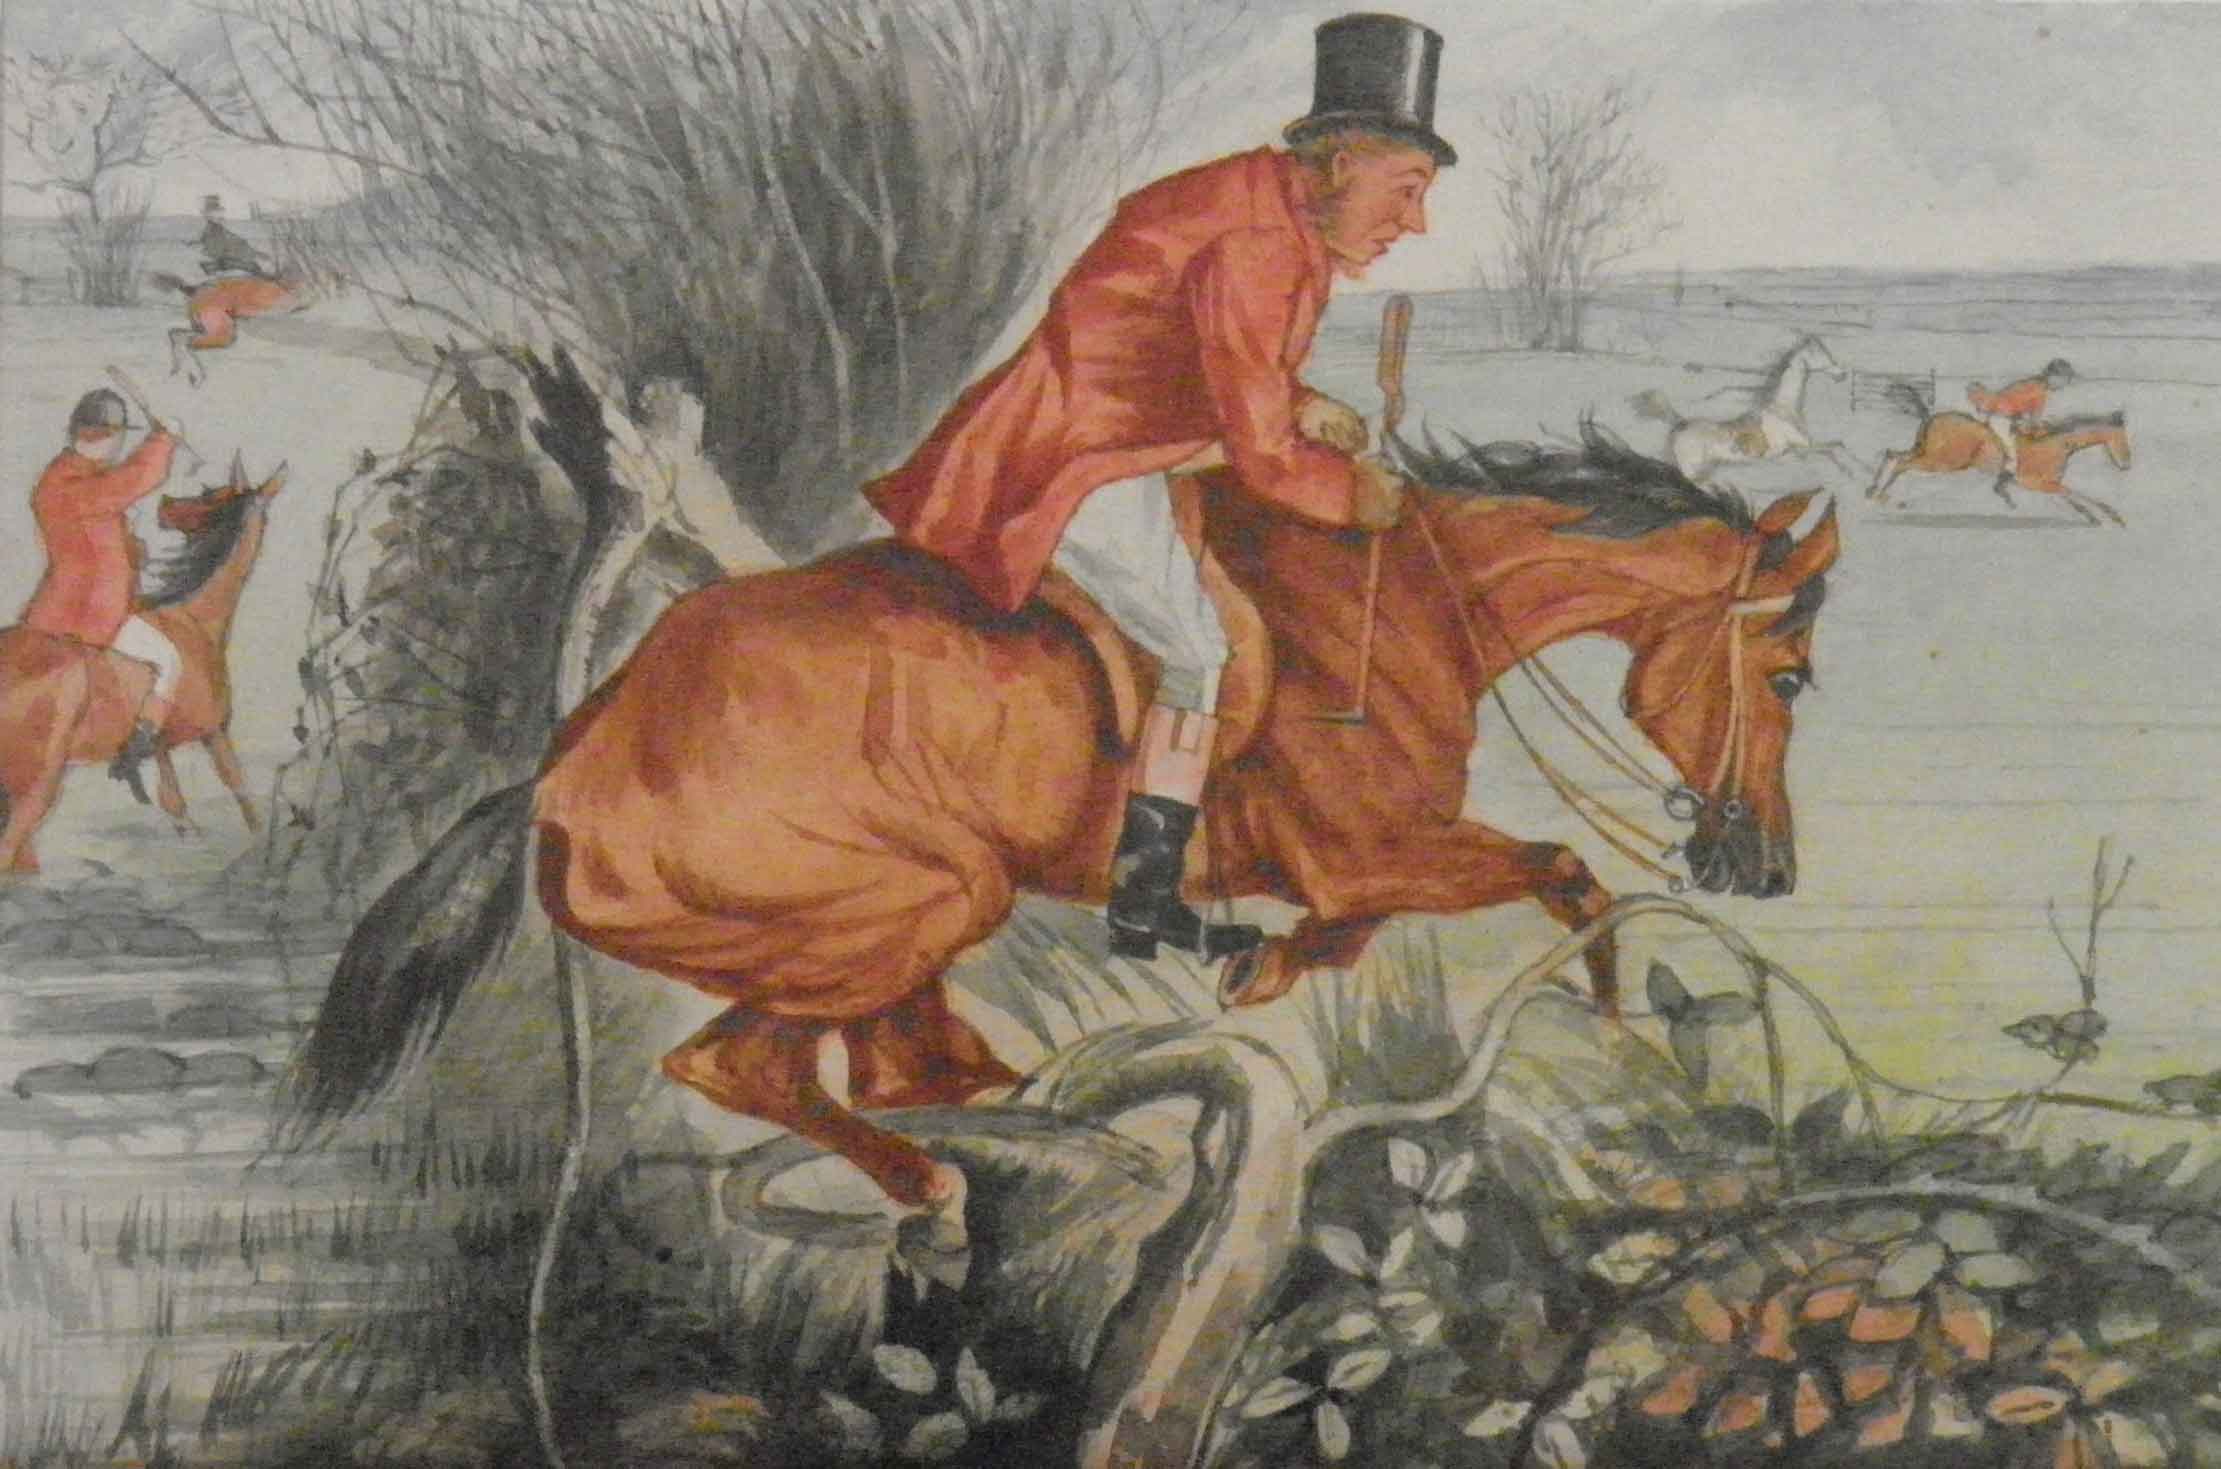 Comical Antique fox hunting watercolour painting. Antique fox hunting watercolour painting.  Original Victorian antique fox hunting watercolour inscribed FSF. Hand written inscription, “Mr Sniggins has a day amongst the banks…”